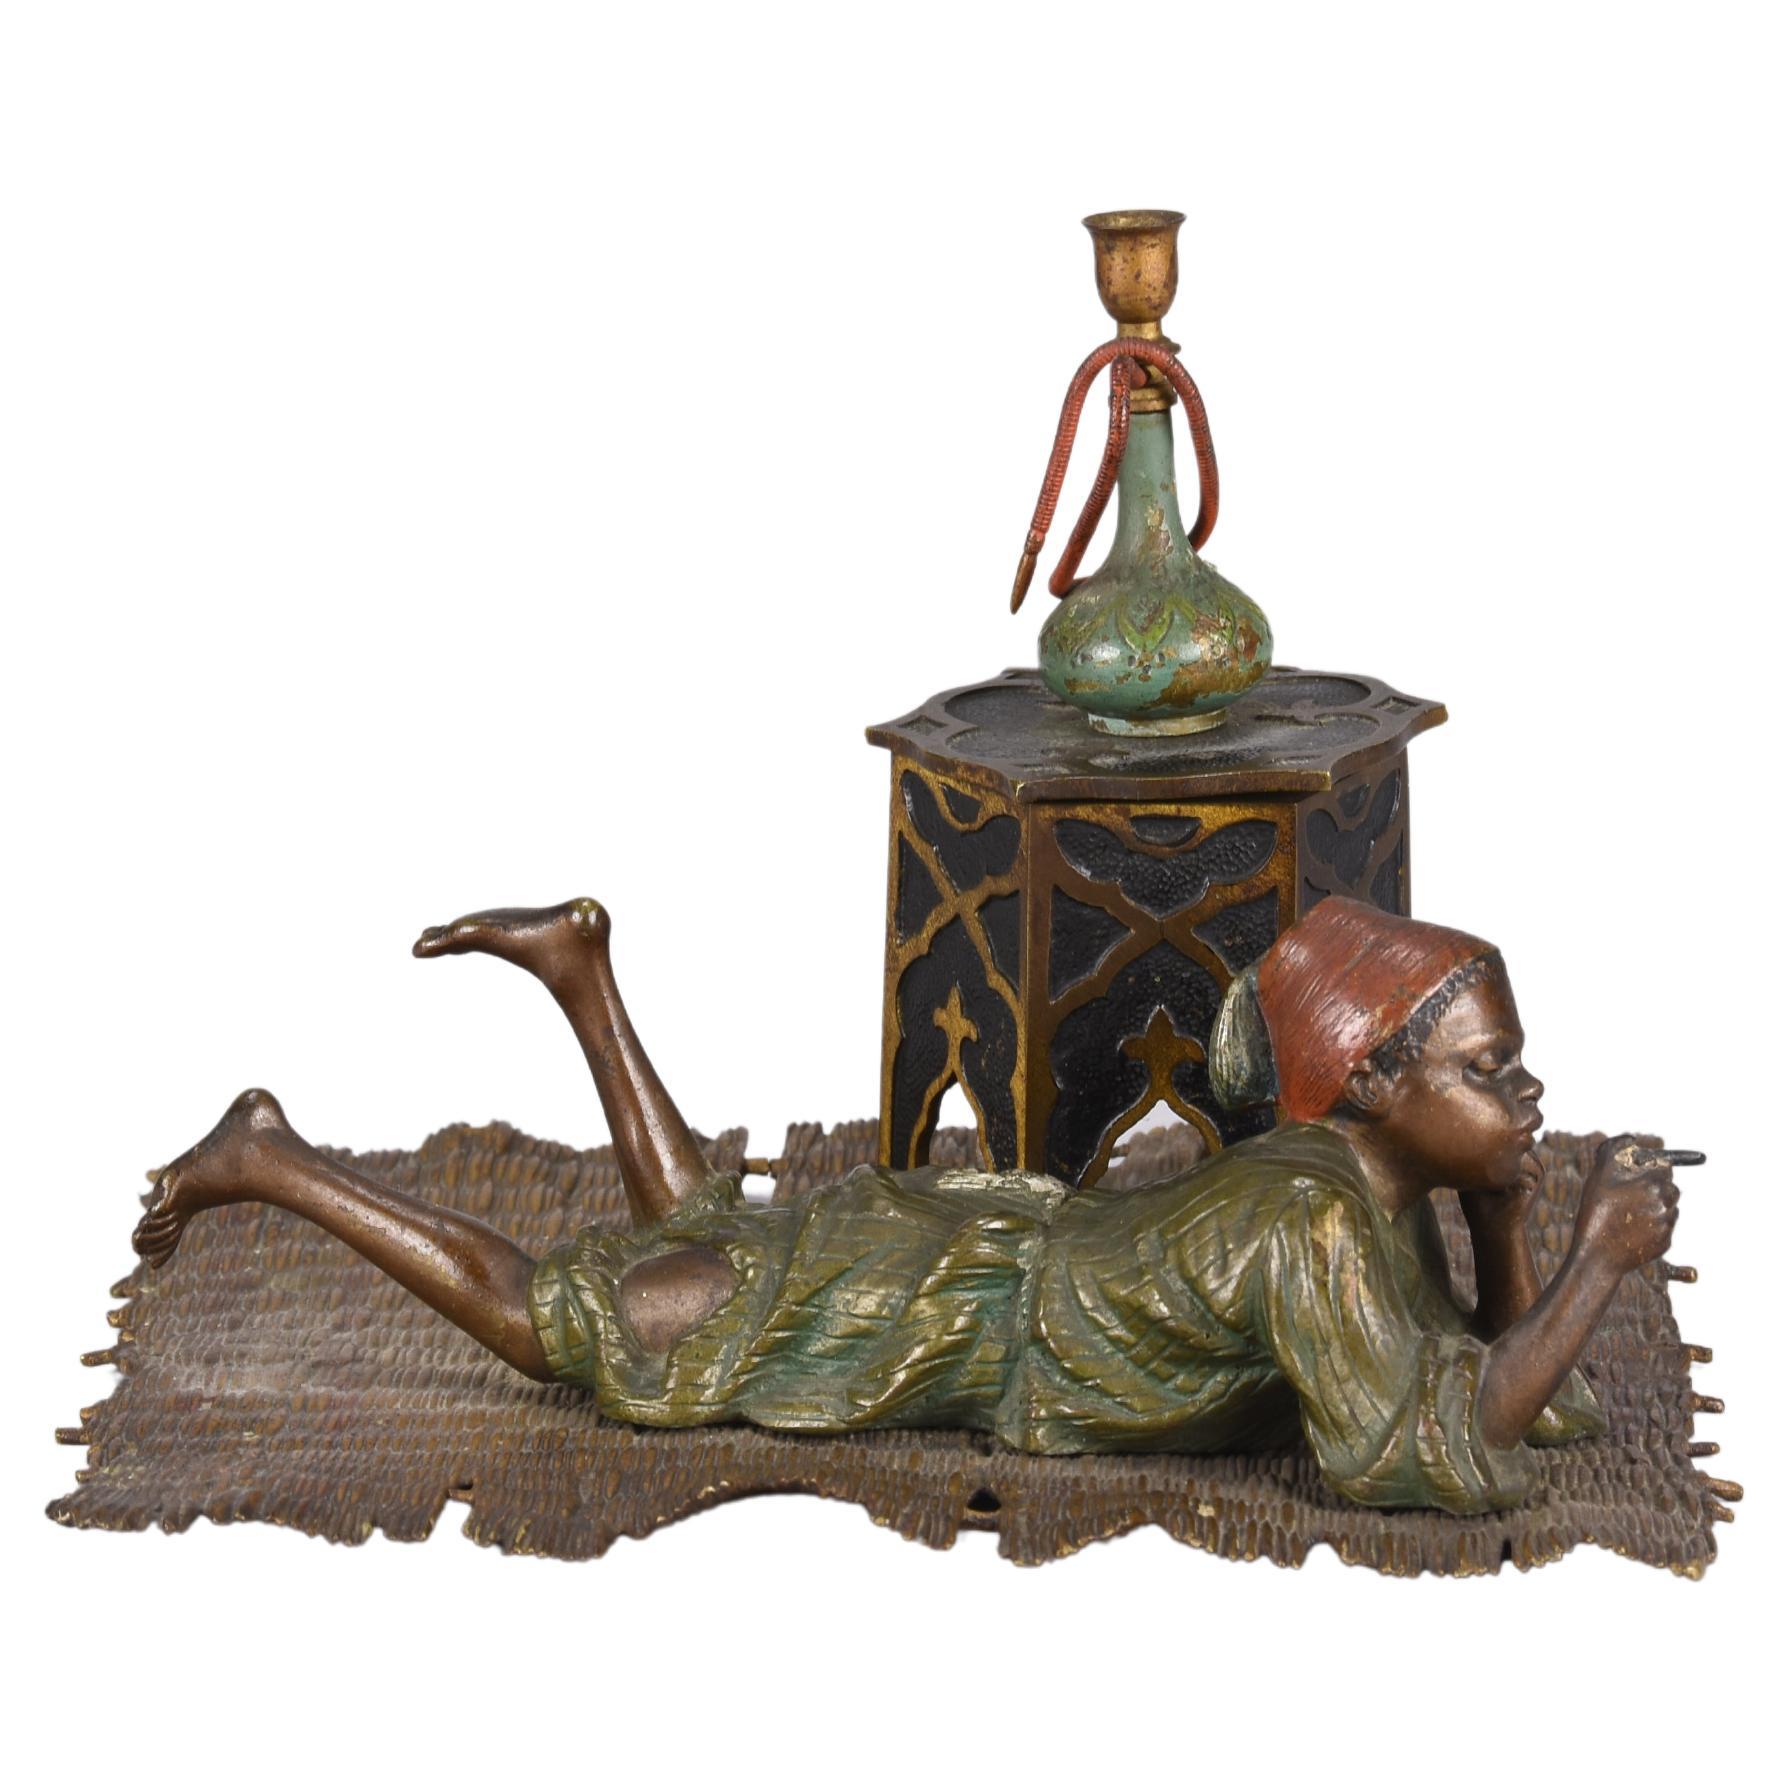 Early 20th Century Cold Painted Bronze "Boy on Rug Inkwell" by Franz Bergman